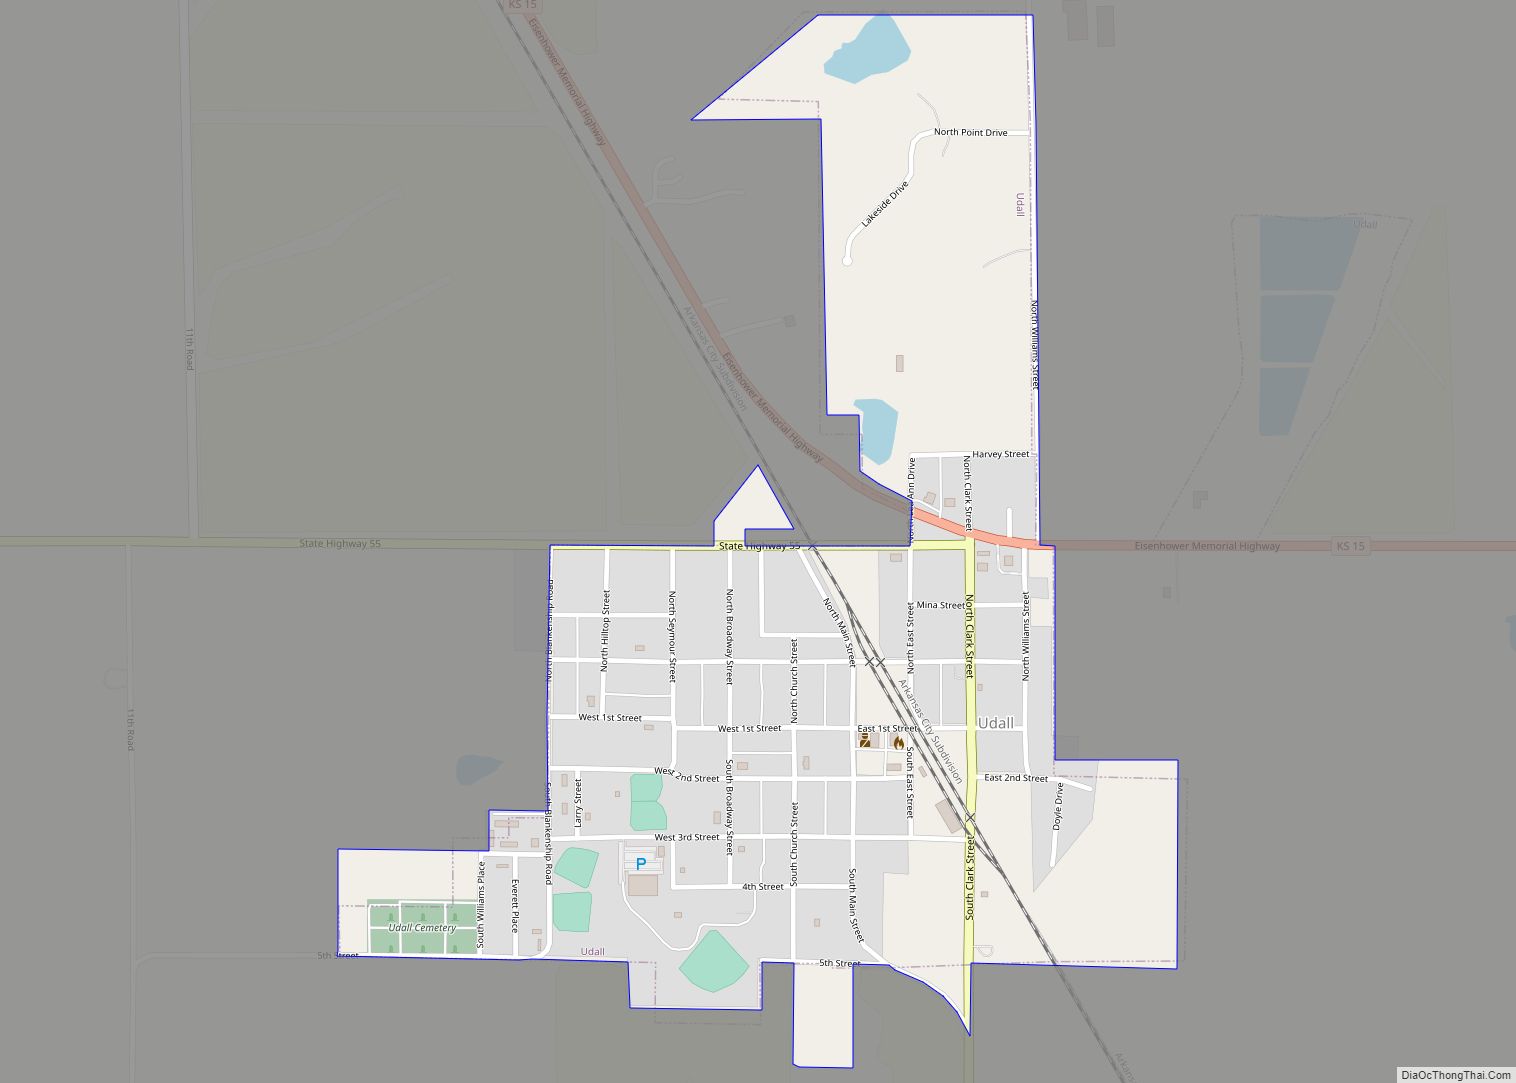 Map of Udall city